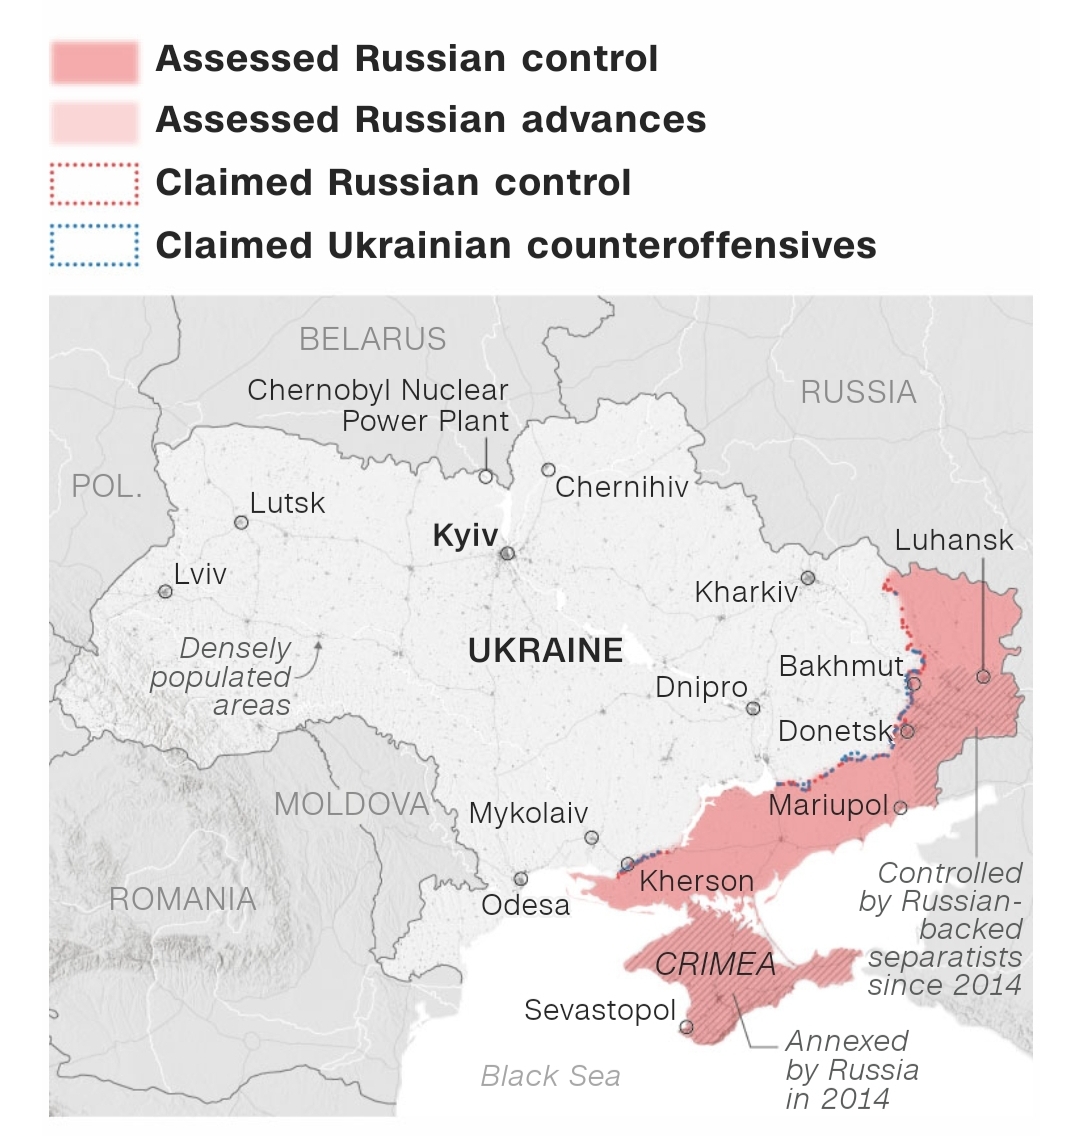 Data as of Nov. 22, 2023 at 3 p.m. ET  Notes: “Assessed” means the Institute for the Study of War has received reliable and independently verifiable information to demonstrate Russian control or advances in those areas. Russian advances are areas where Russian forces have operated in or launched attacks, but they do not control them. “Claimed” areas are where sources have said control or counteroffensives are occurring, but ISW cannot corroborate nor demonstrate them to be false.  Sources: The Institute for the Study of War with AEI’s Critical Threats Project; LandScan HD for Ukraine, Oak Ridge National Laboratory  Graphic: Lou Robinson and Renée Rigdon, CNN